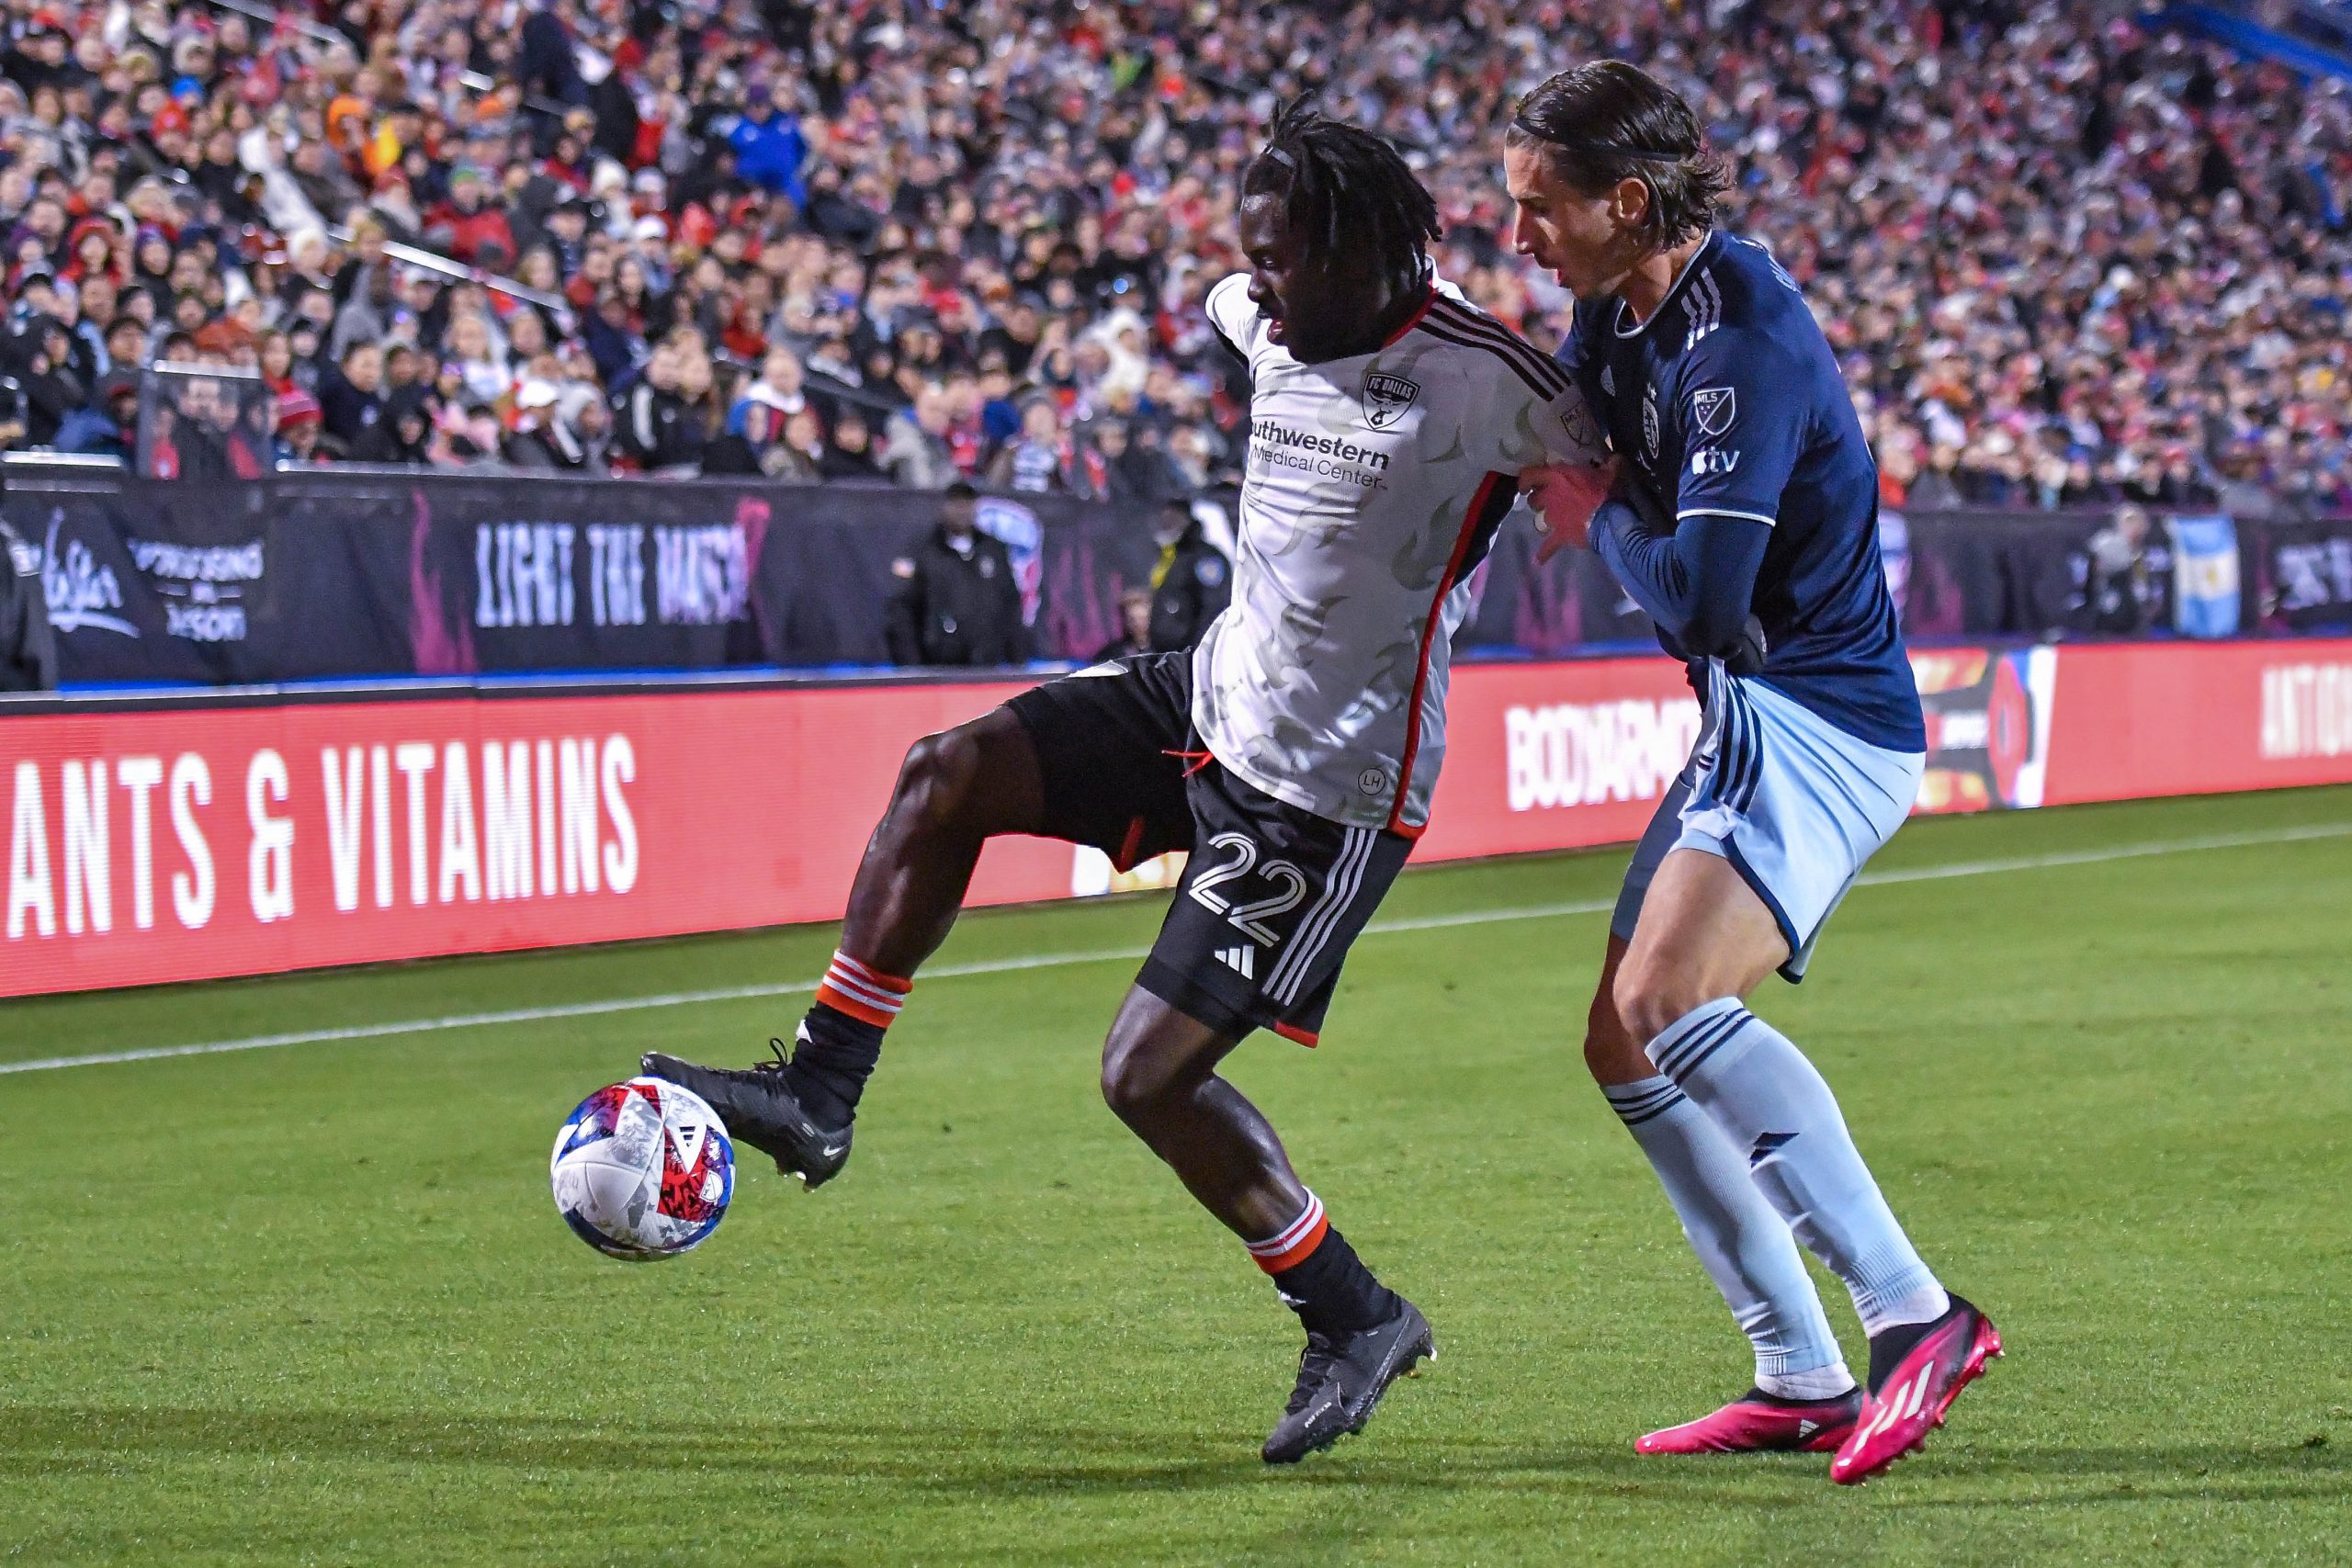 Sporting KC defender Ben Sweat stands up Ema Twumasi in the MLS match on Saturday, March 18, 2023, at Toyota Stadium. (Daniel McCullough, 3rd Degree)